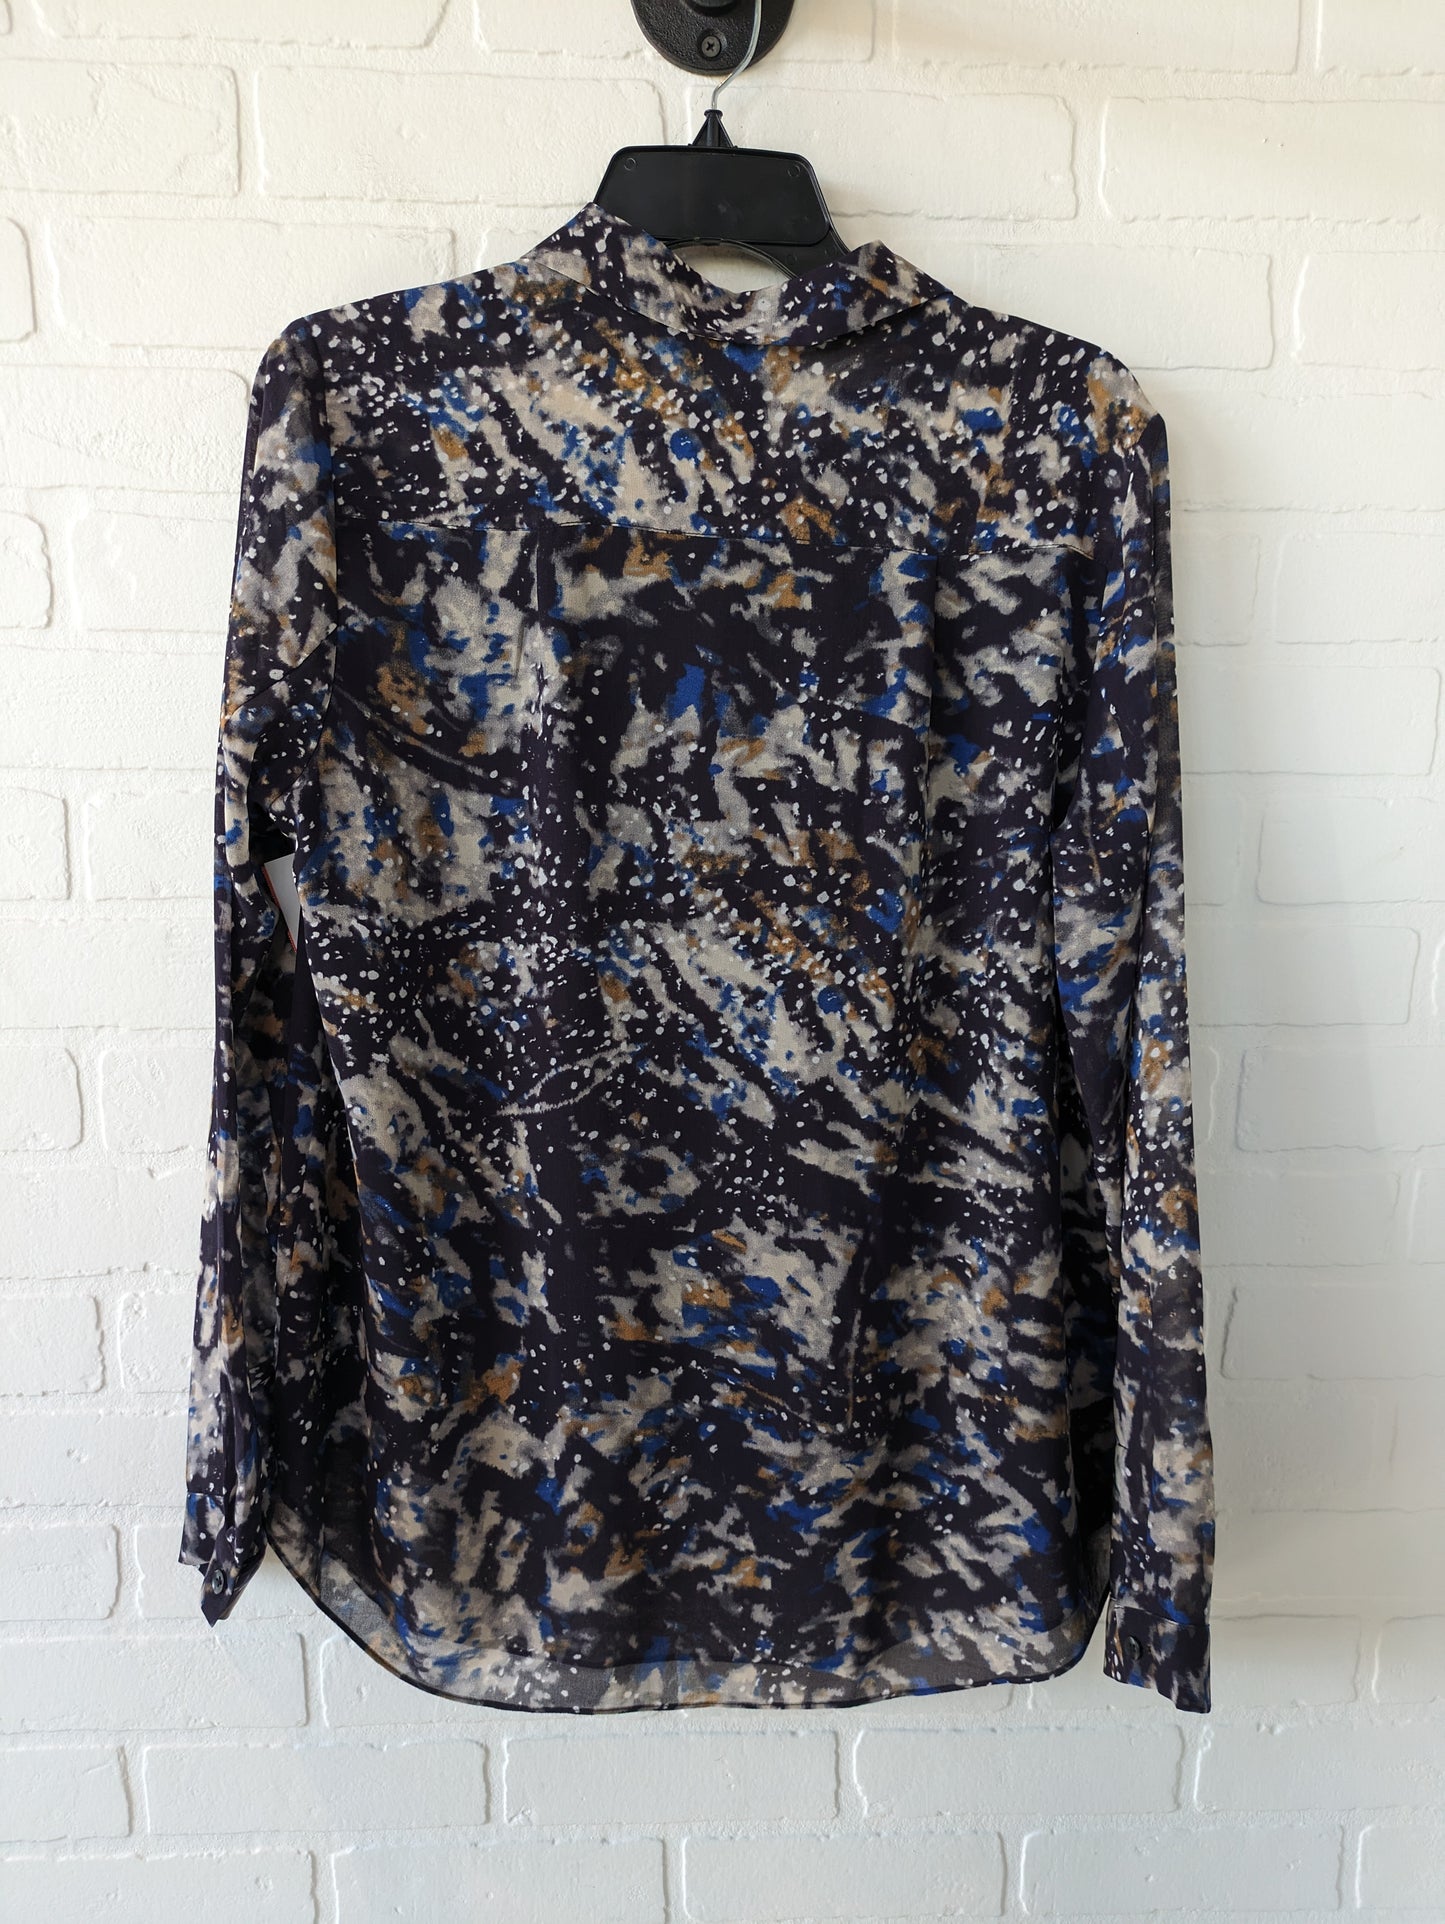 Blouse Long Sleeve By Cabi  Size: M